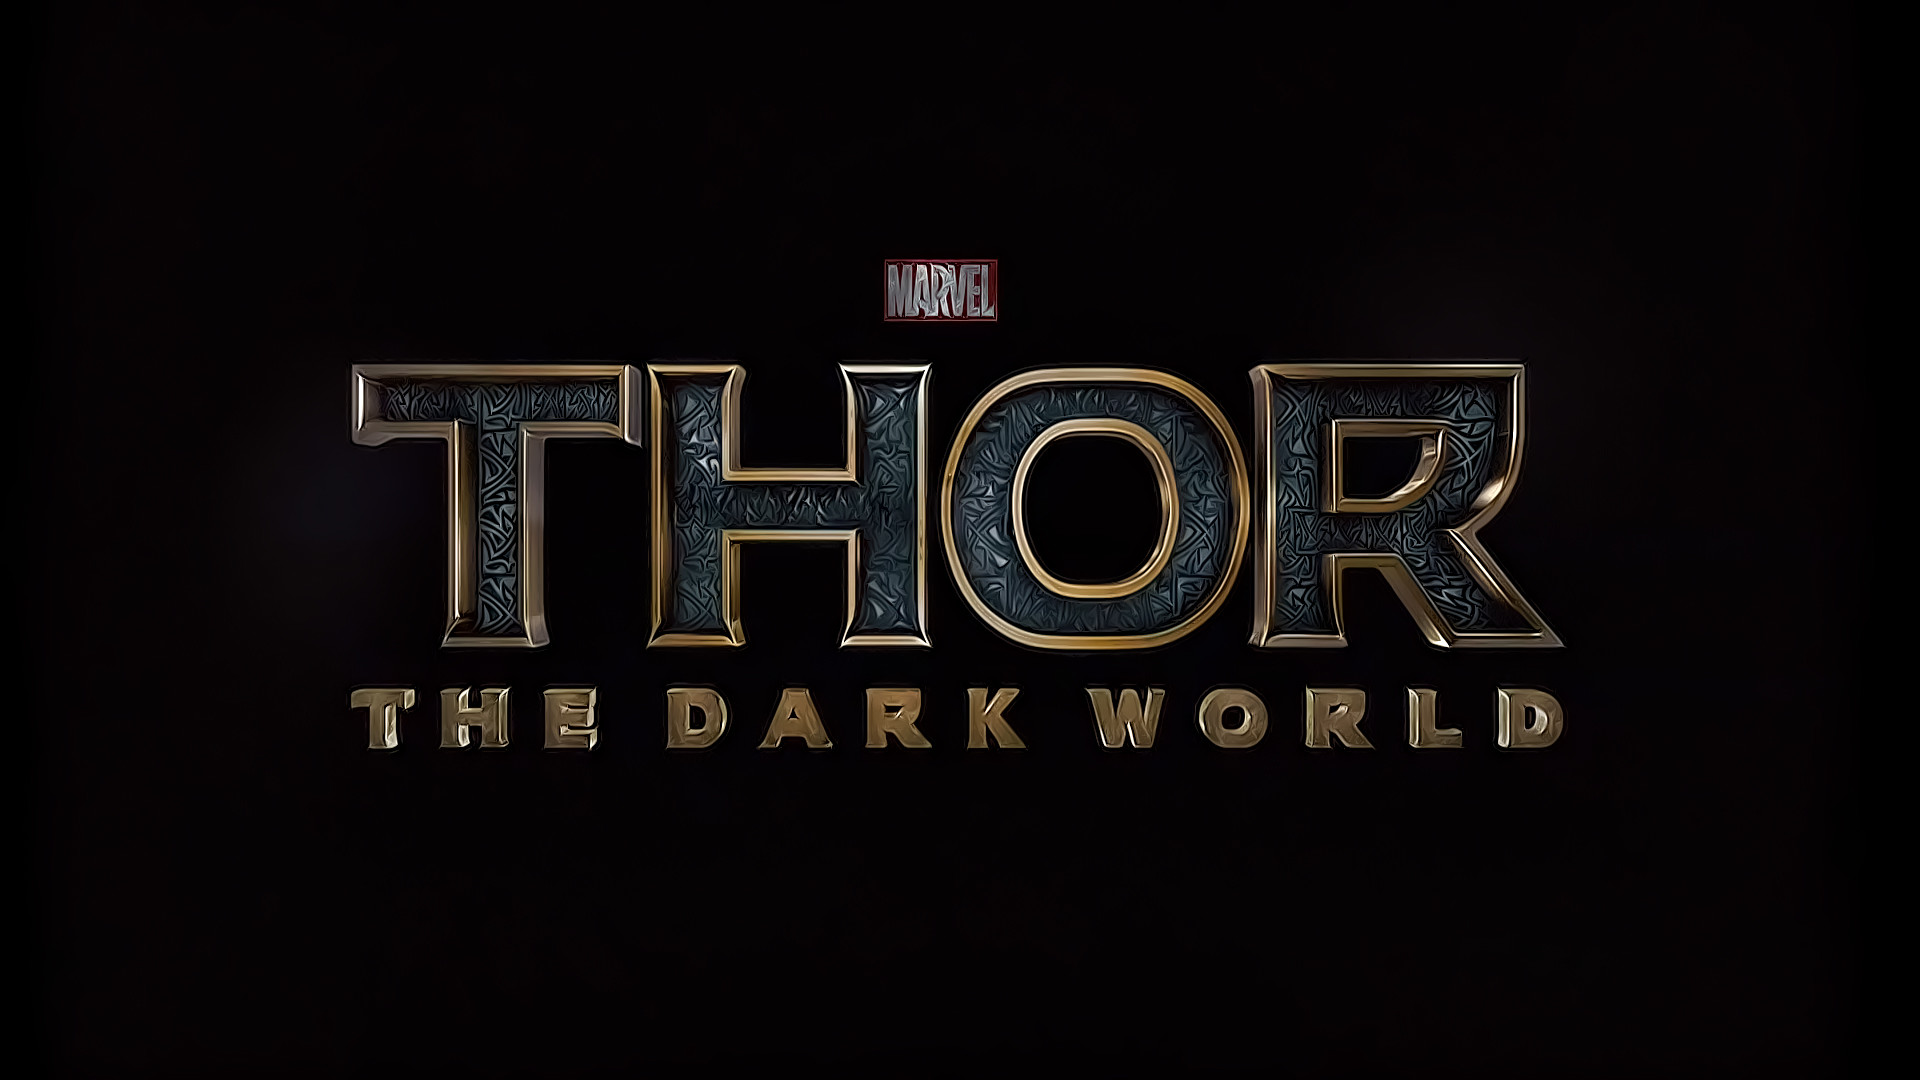 1920x1080 Marvel Live-action Movies images thor dark world HD wallpaper and .